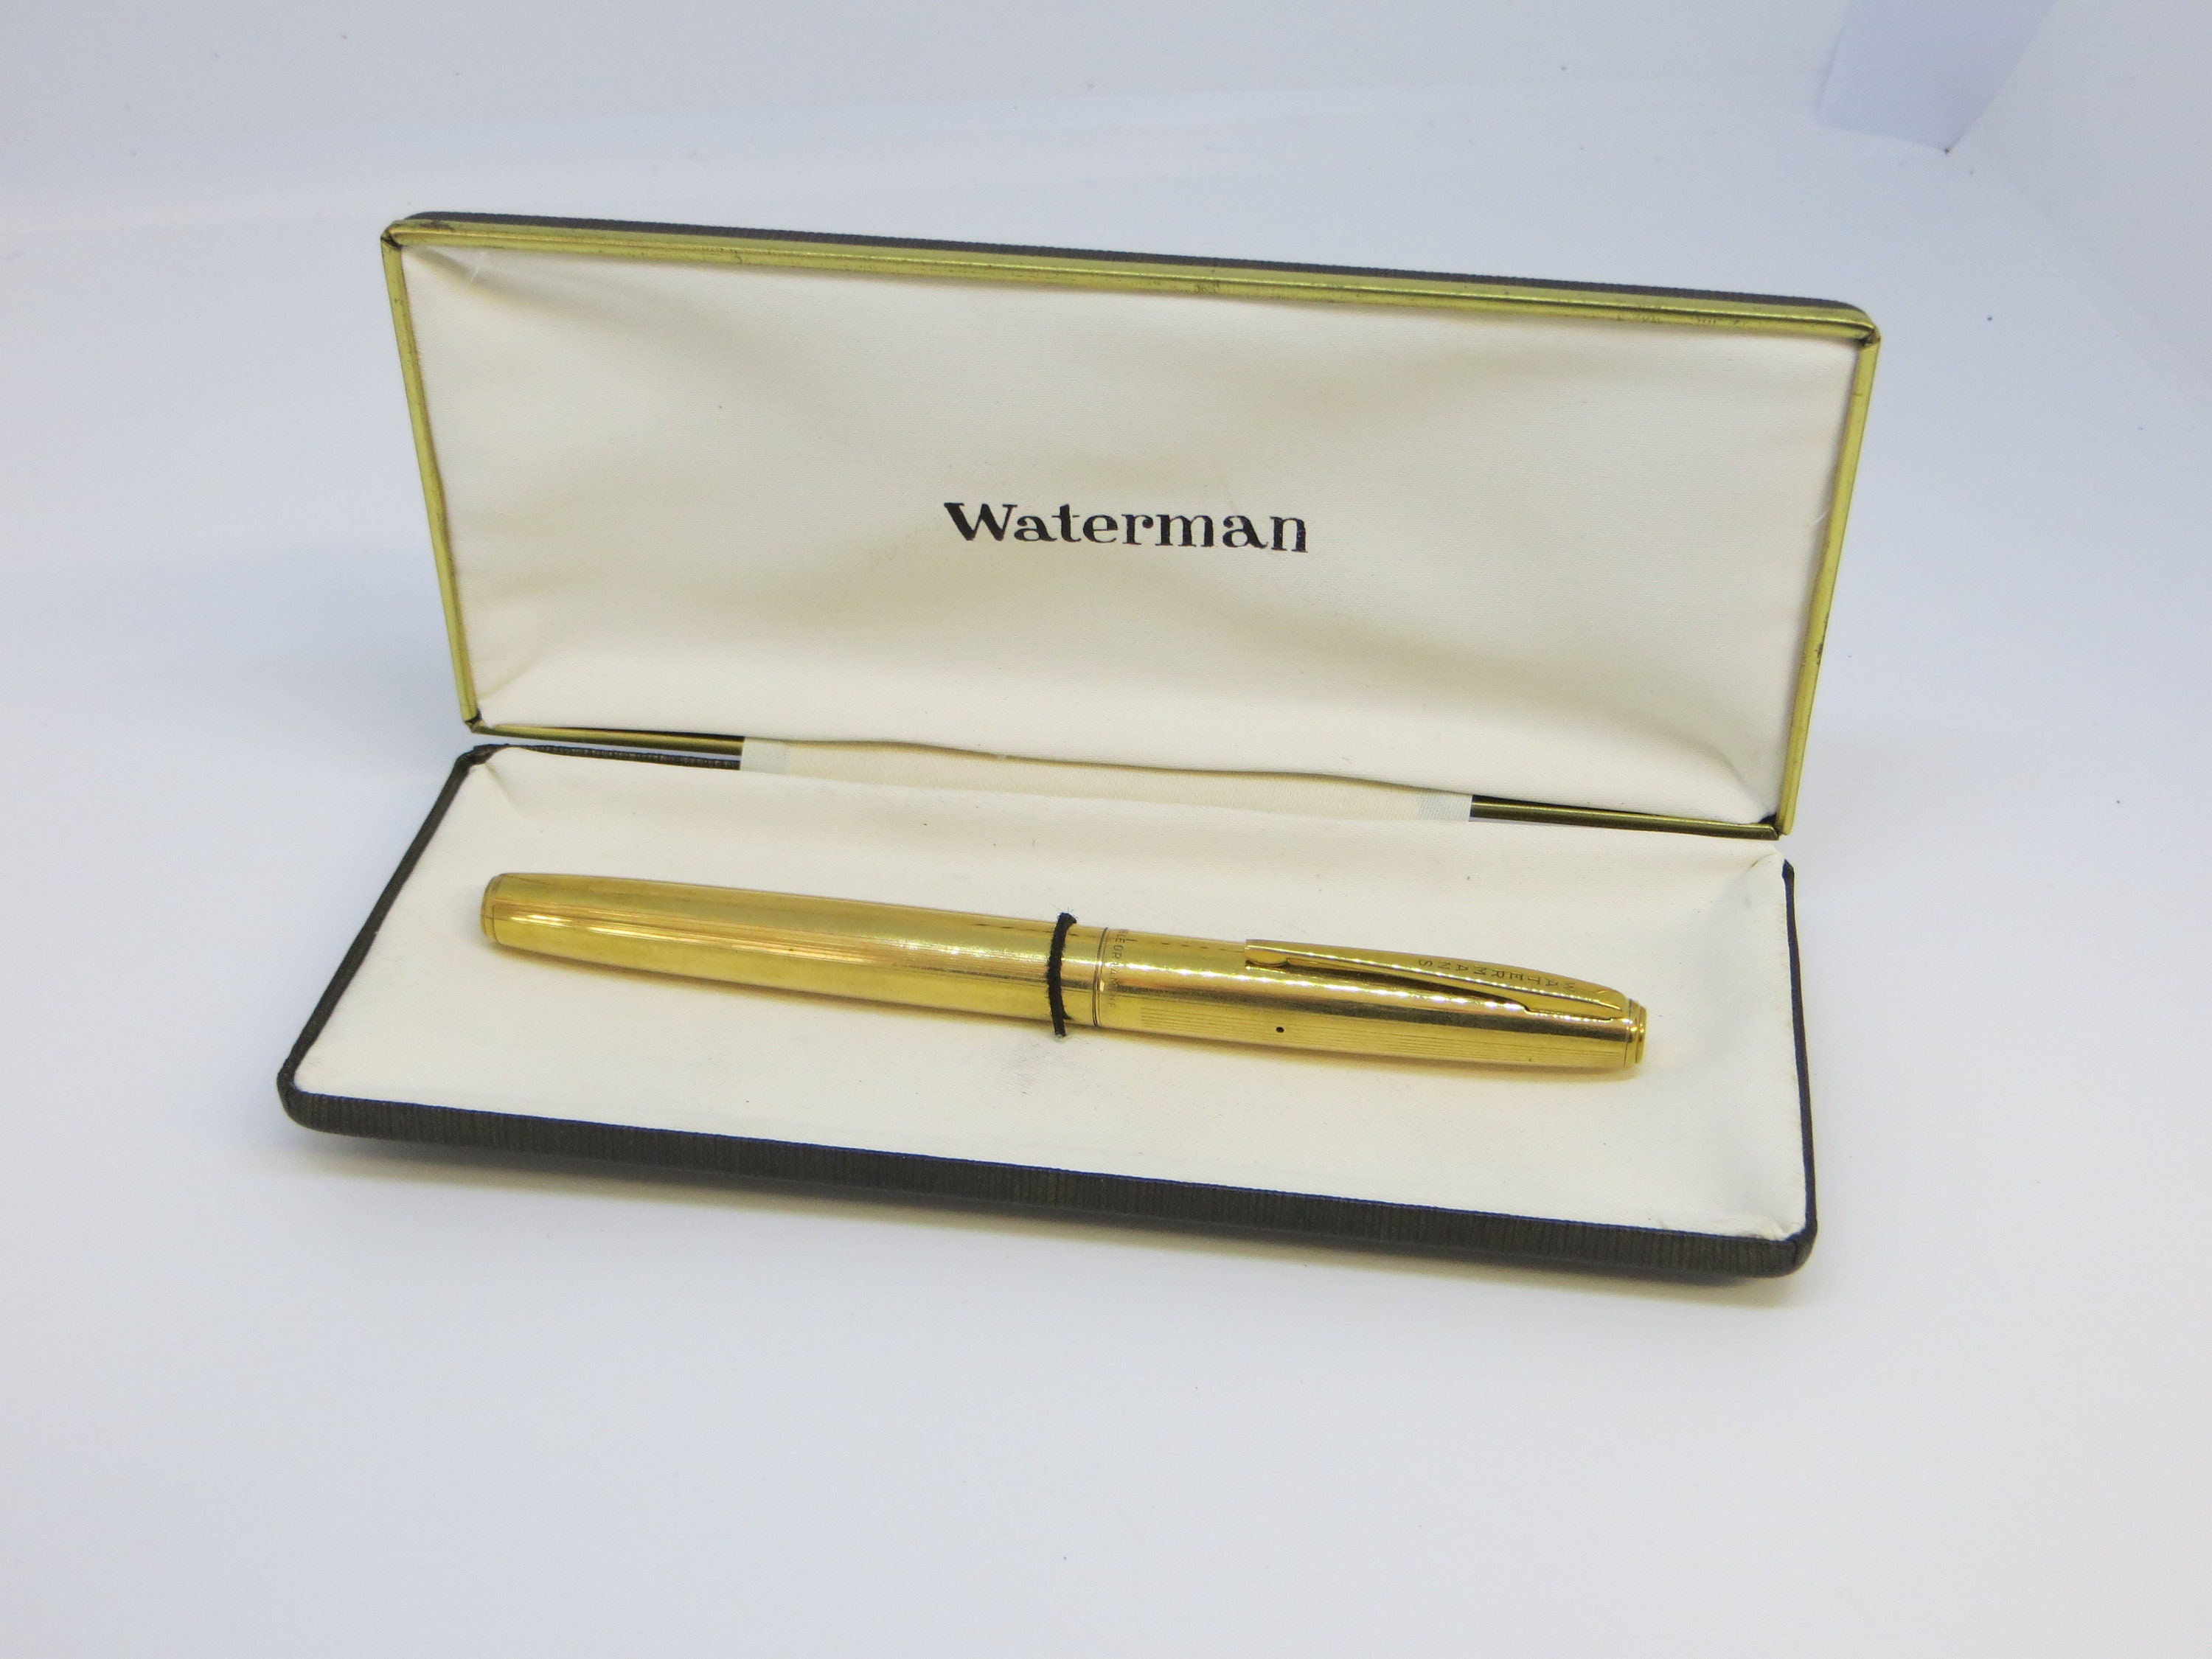 Wordsworth & Black Fountain Pen Set Comes With 6 Ink Cartridges, Refill  Converter, Fountain Pen Case, Corporate Gifts extra Fine Nib 